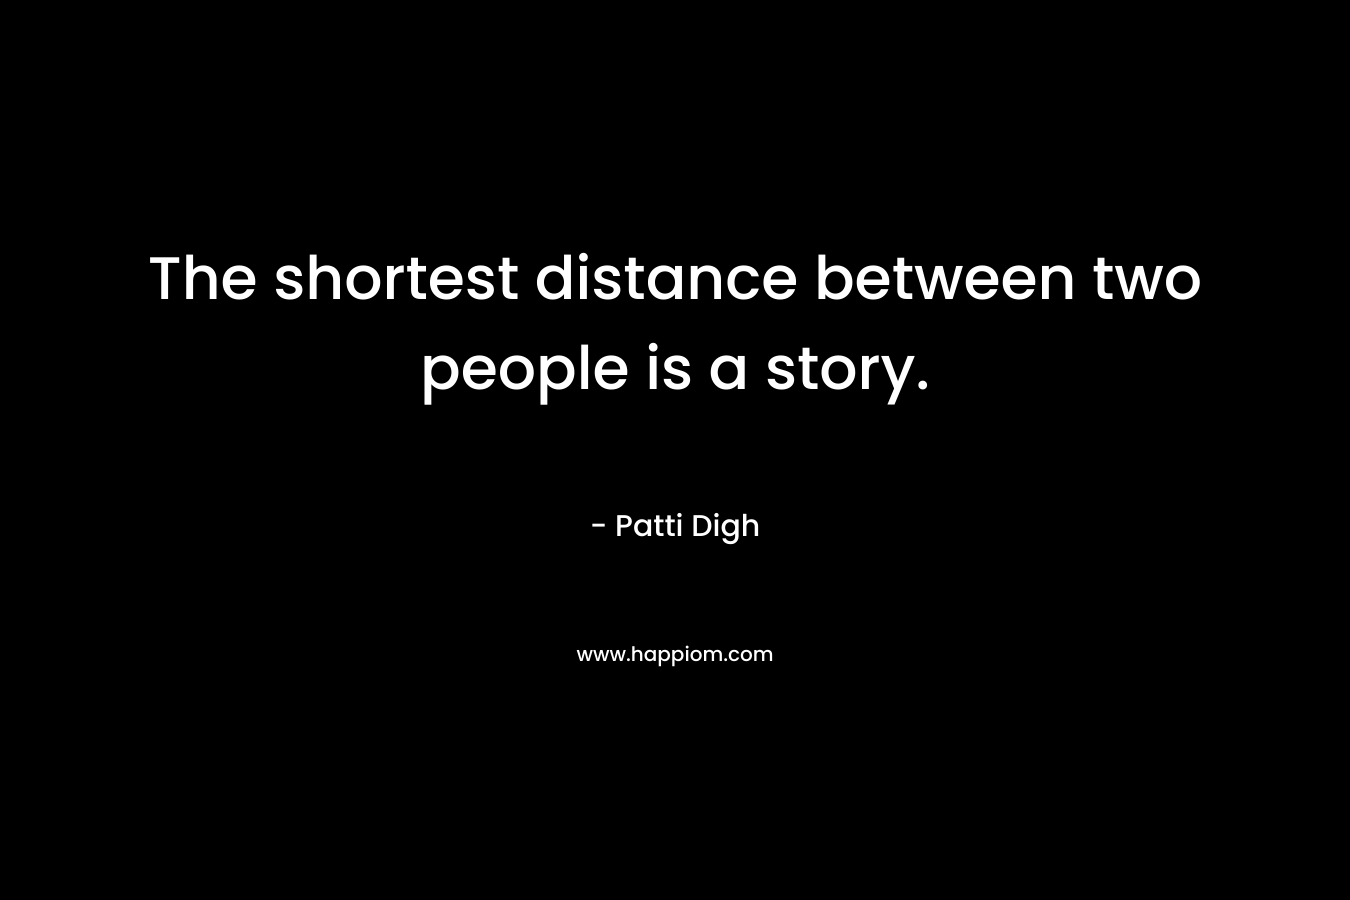 The shortest distance between two people is a story. – Patti Digh